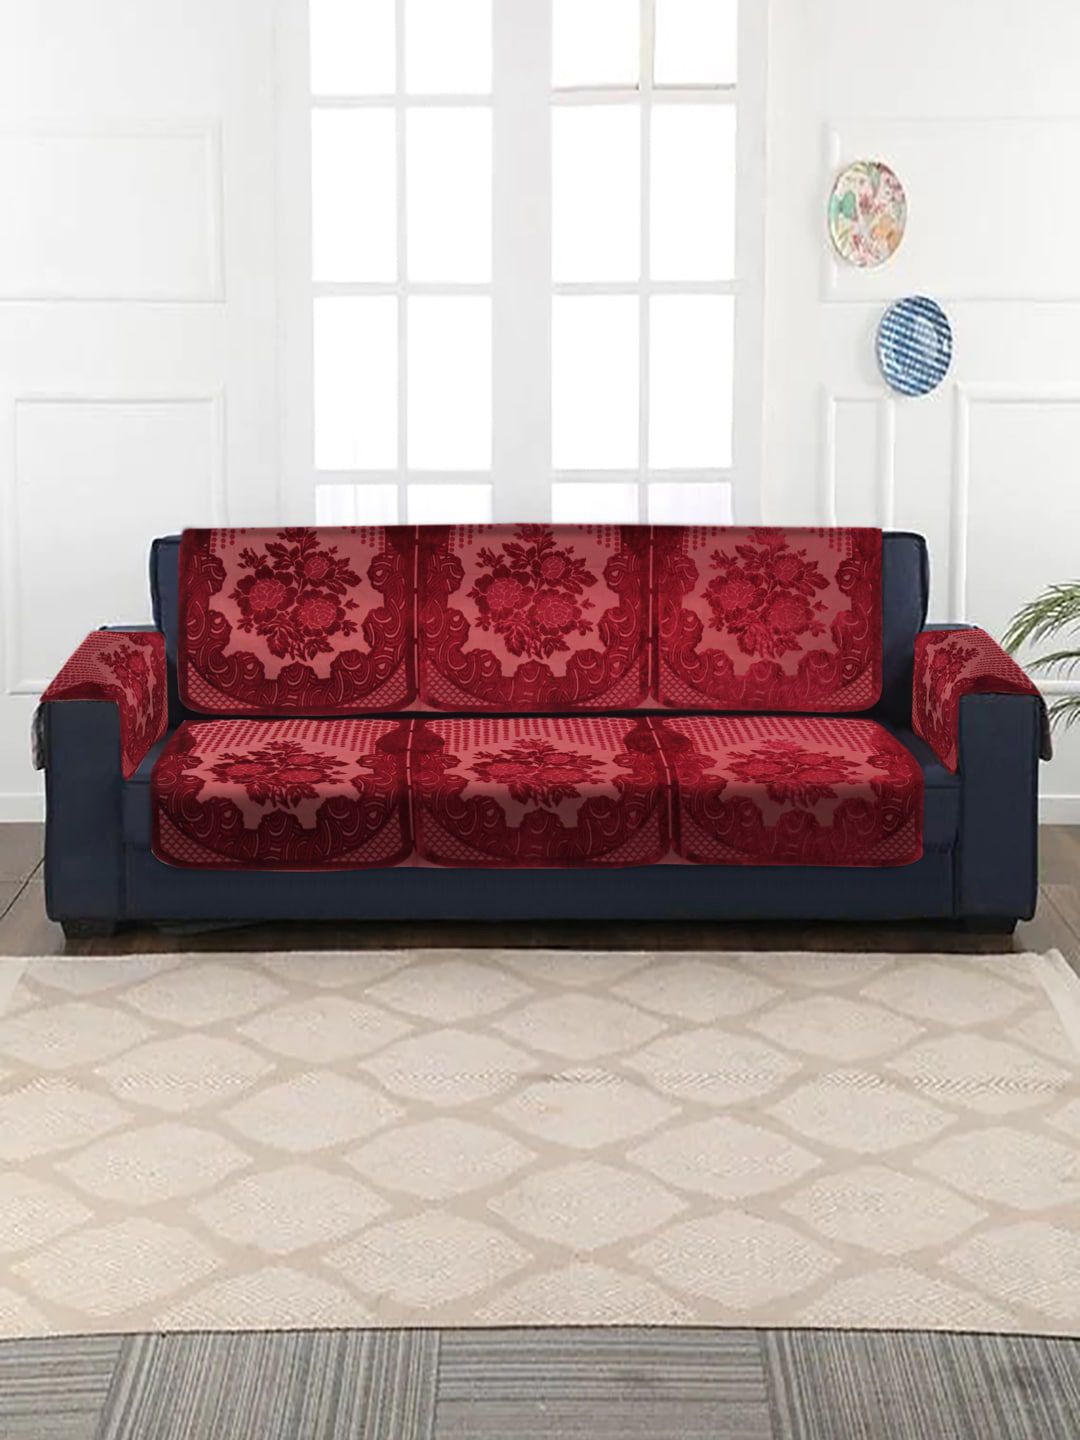 HOSTA HOMES Maroon Floral Embossed Velvet 3 Seater Sofa Cover With Arm Rest Covers Price in India